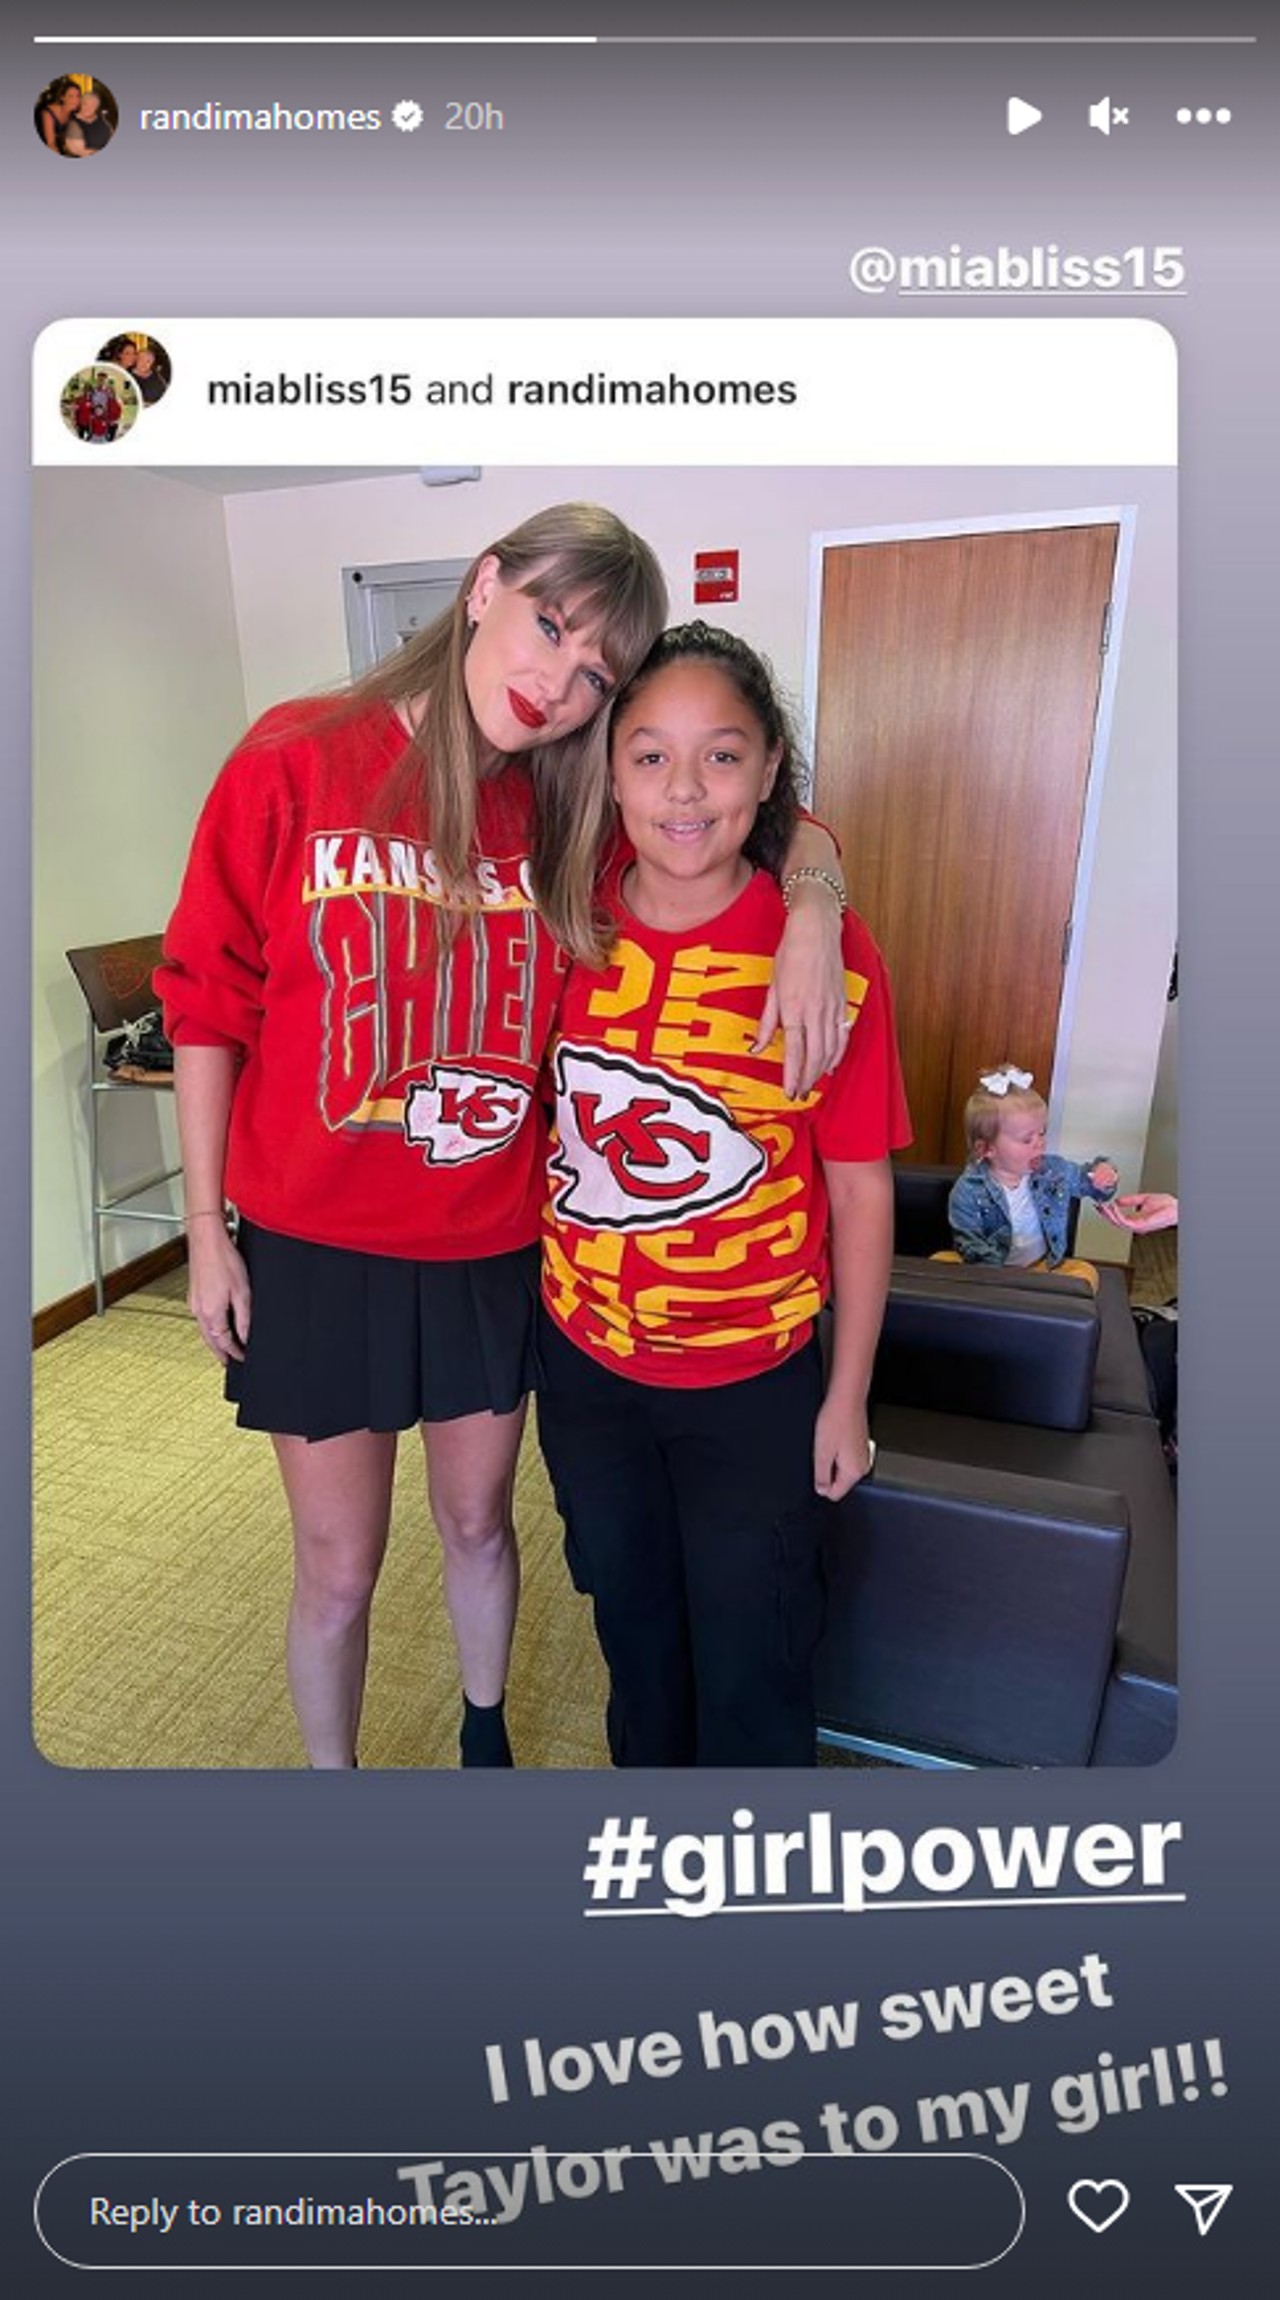 Randi Mahomes' Instagram story of her post about Taylor Swift meeting her daughter Mia Randall.